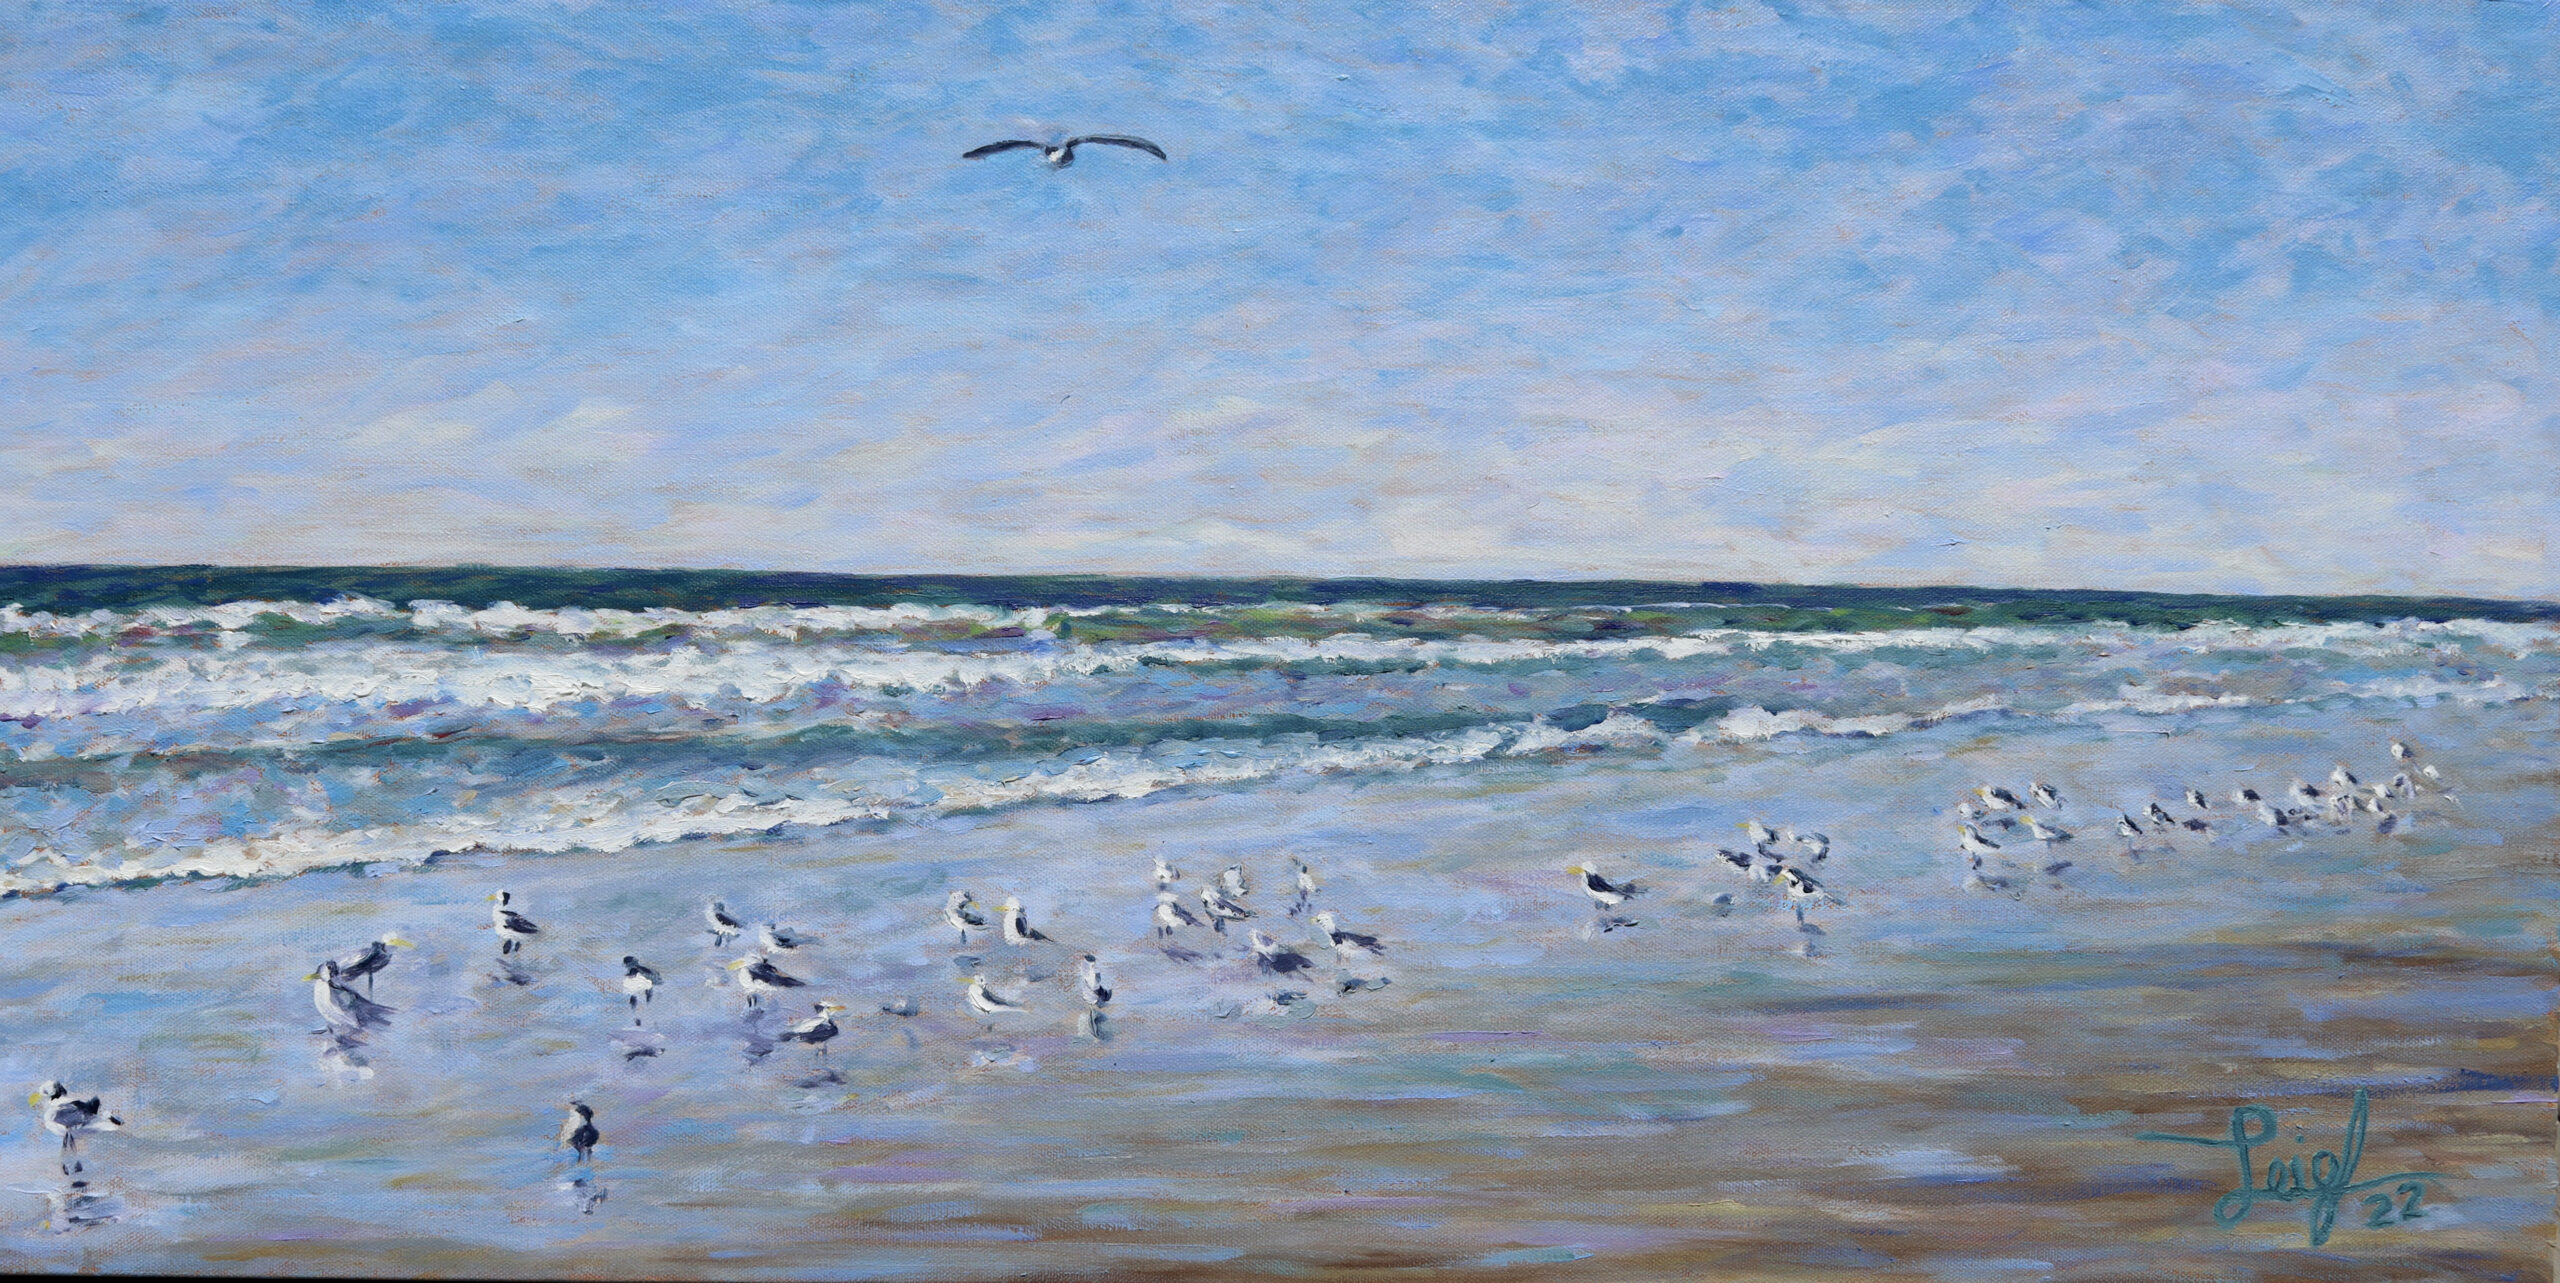 Sea Gulls by Pacific Ave.
(2022)  36 x 18  Not Available  •  On Loan from private party